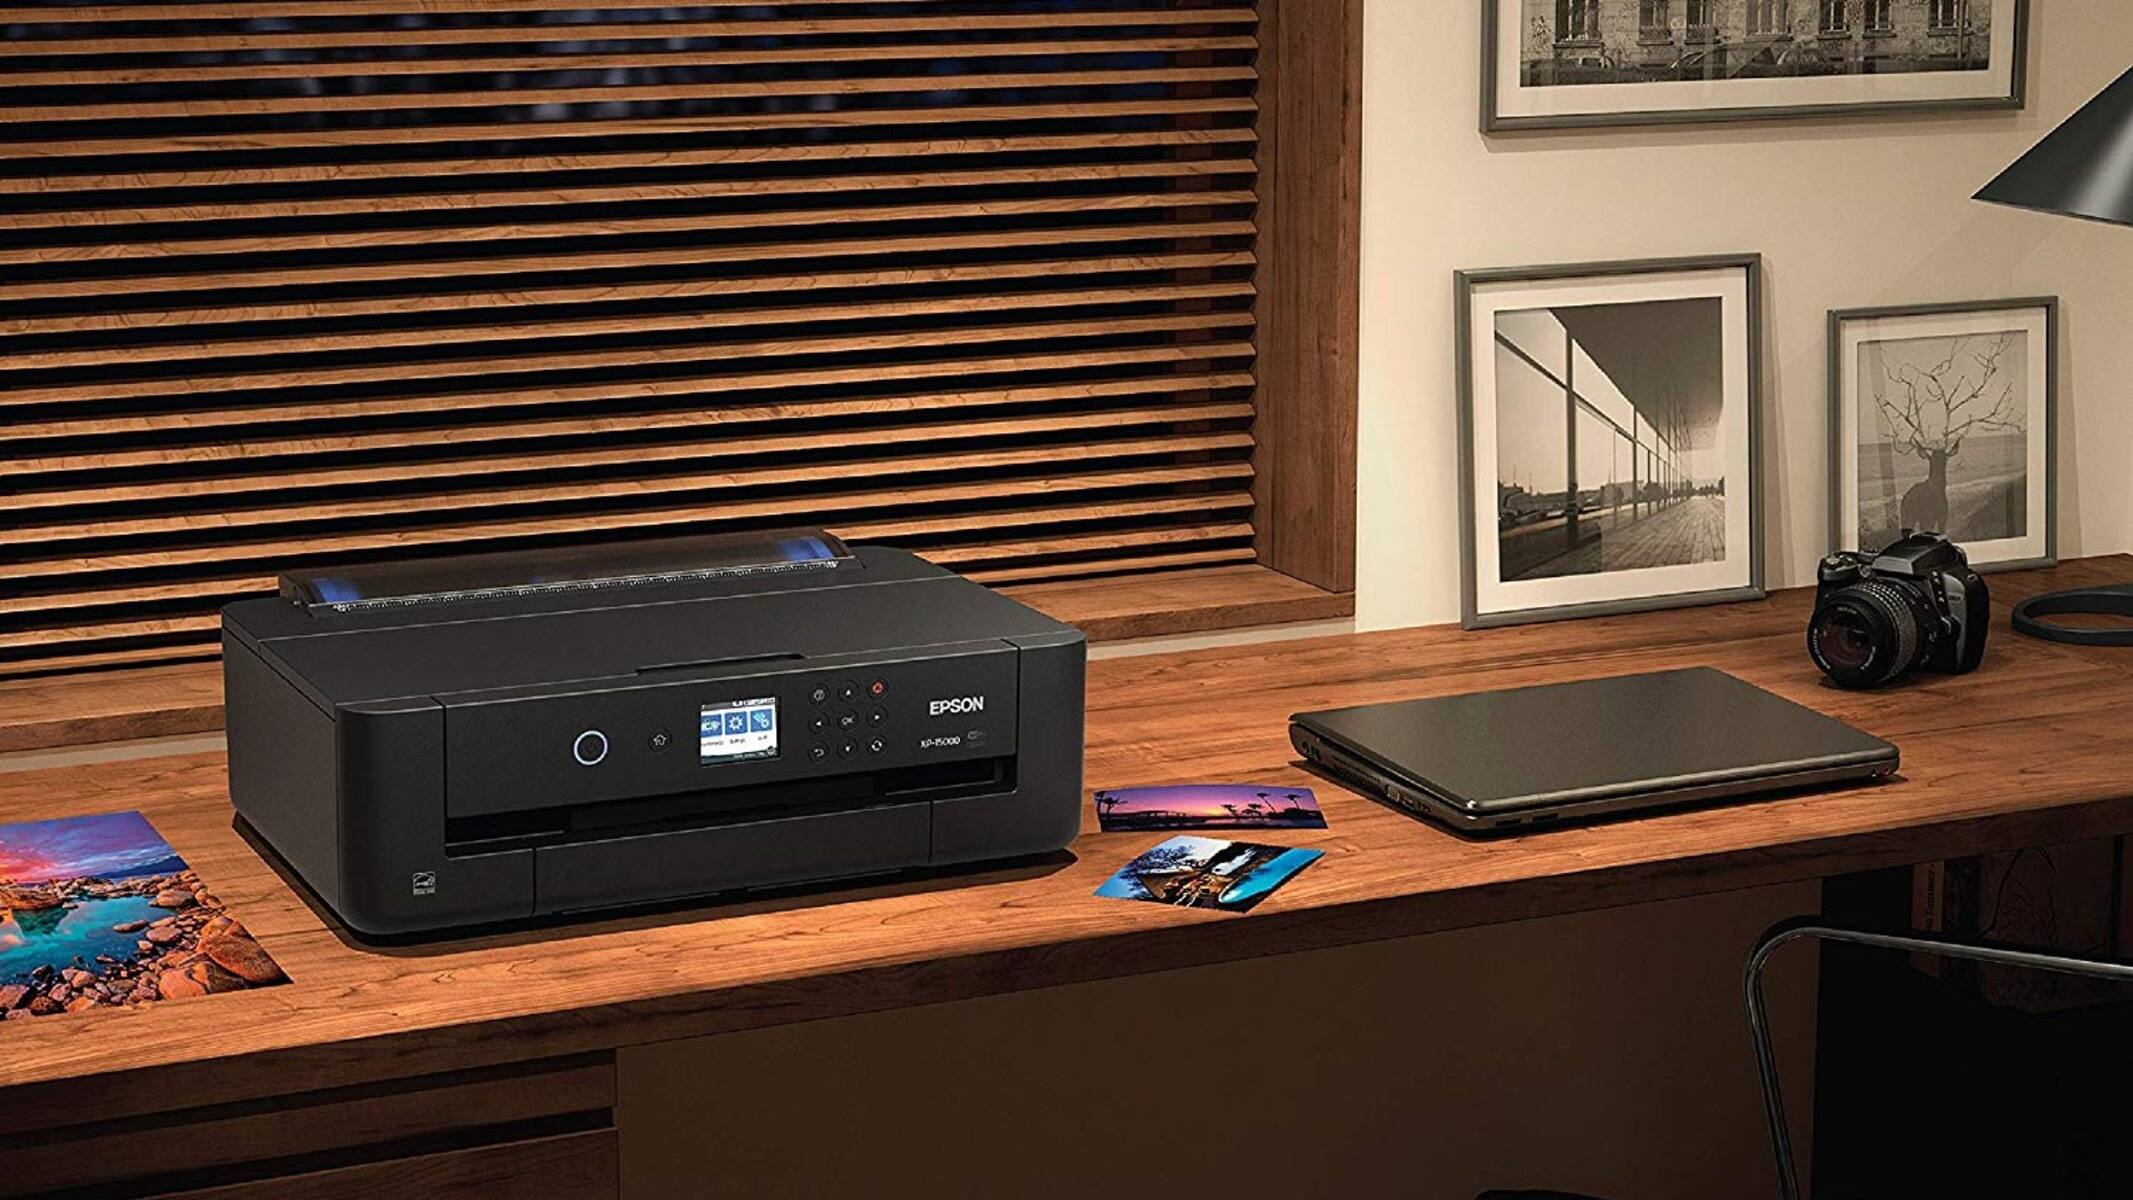 How To Install A Printer In An Offline Virtual Workstation